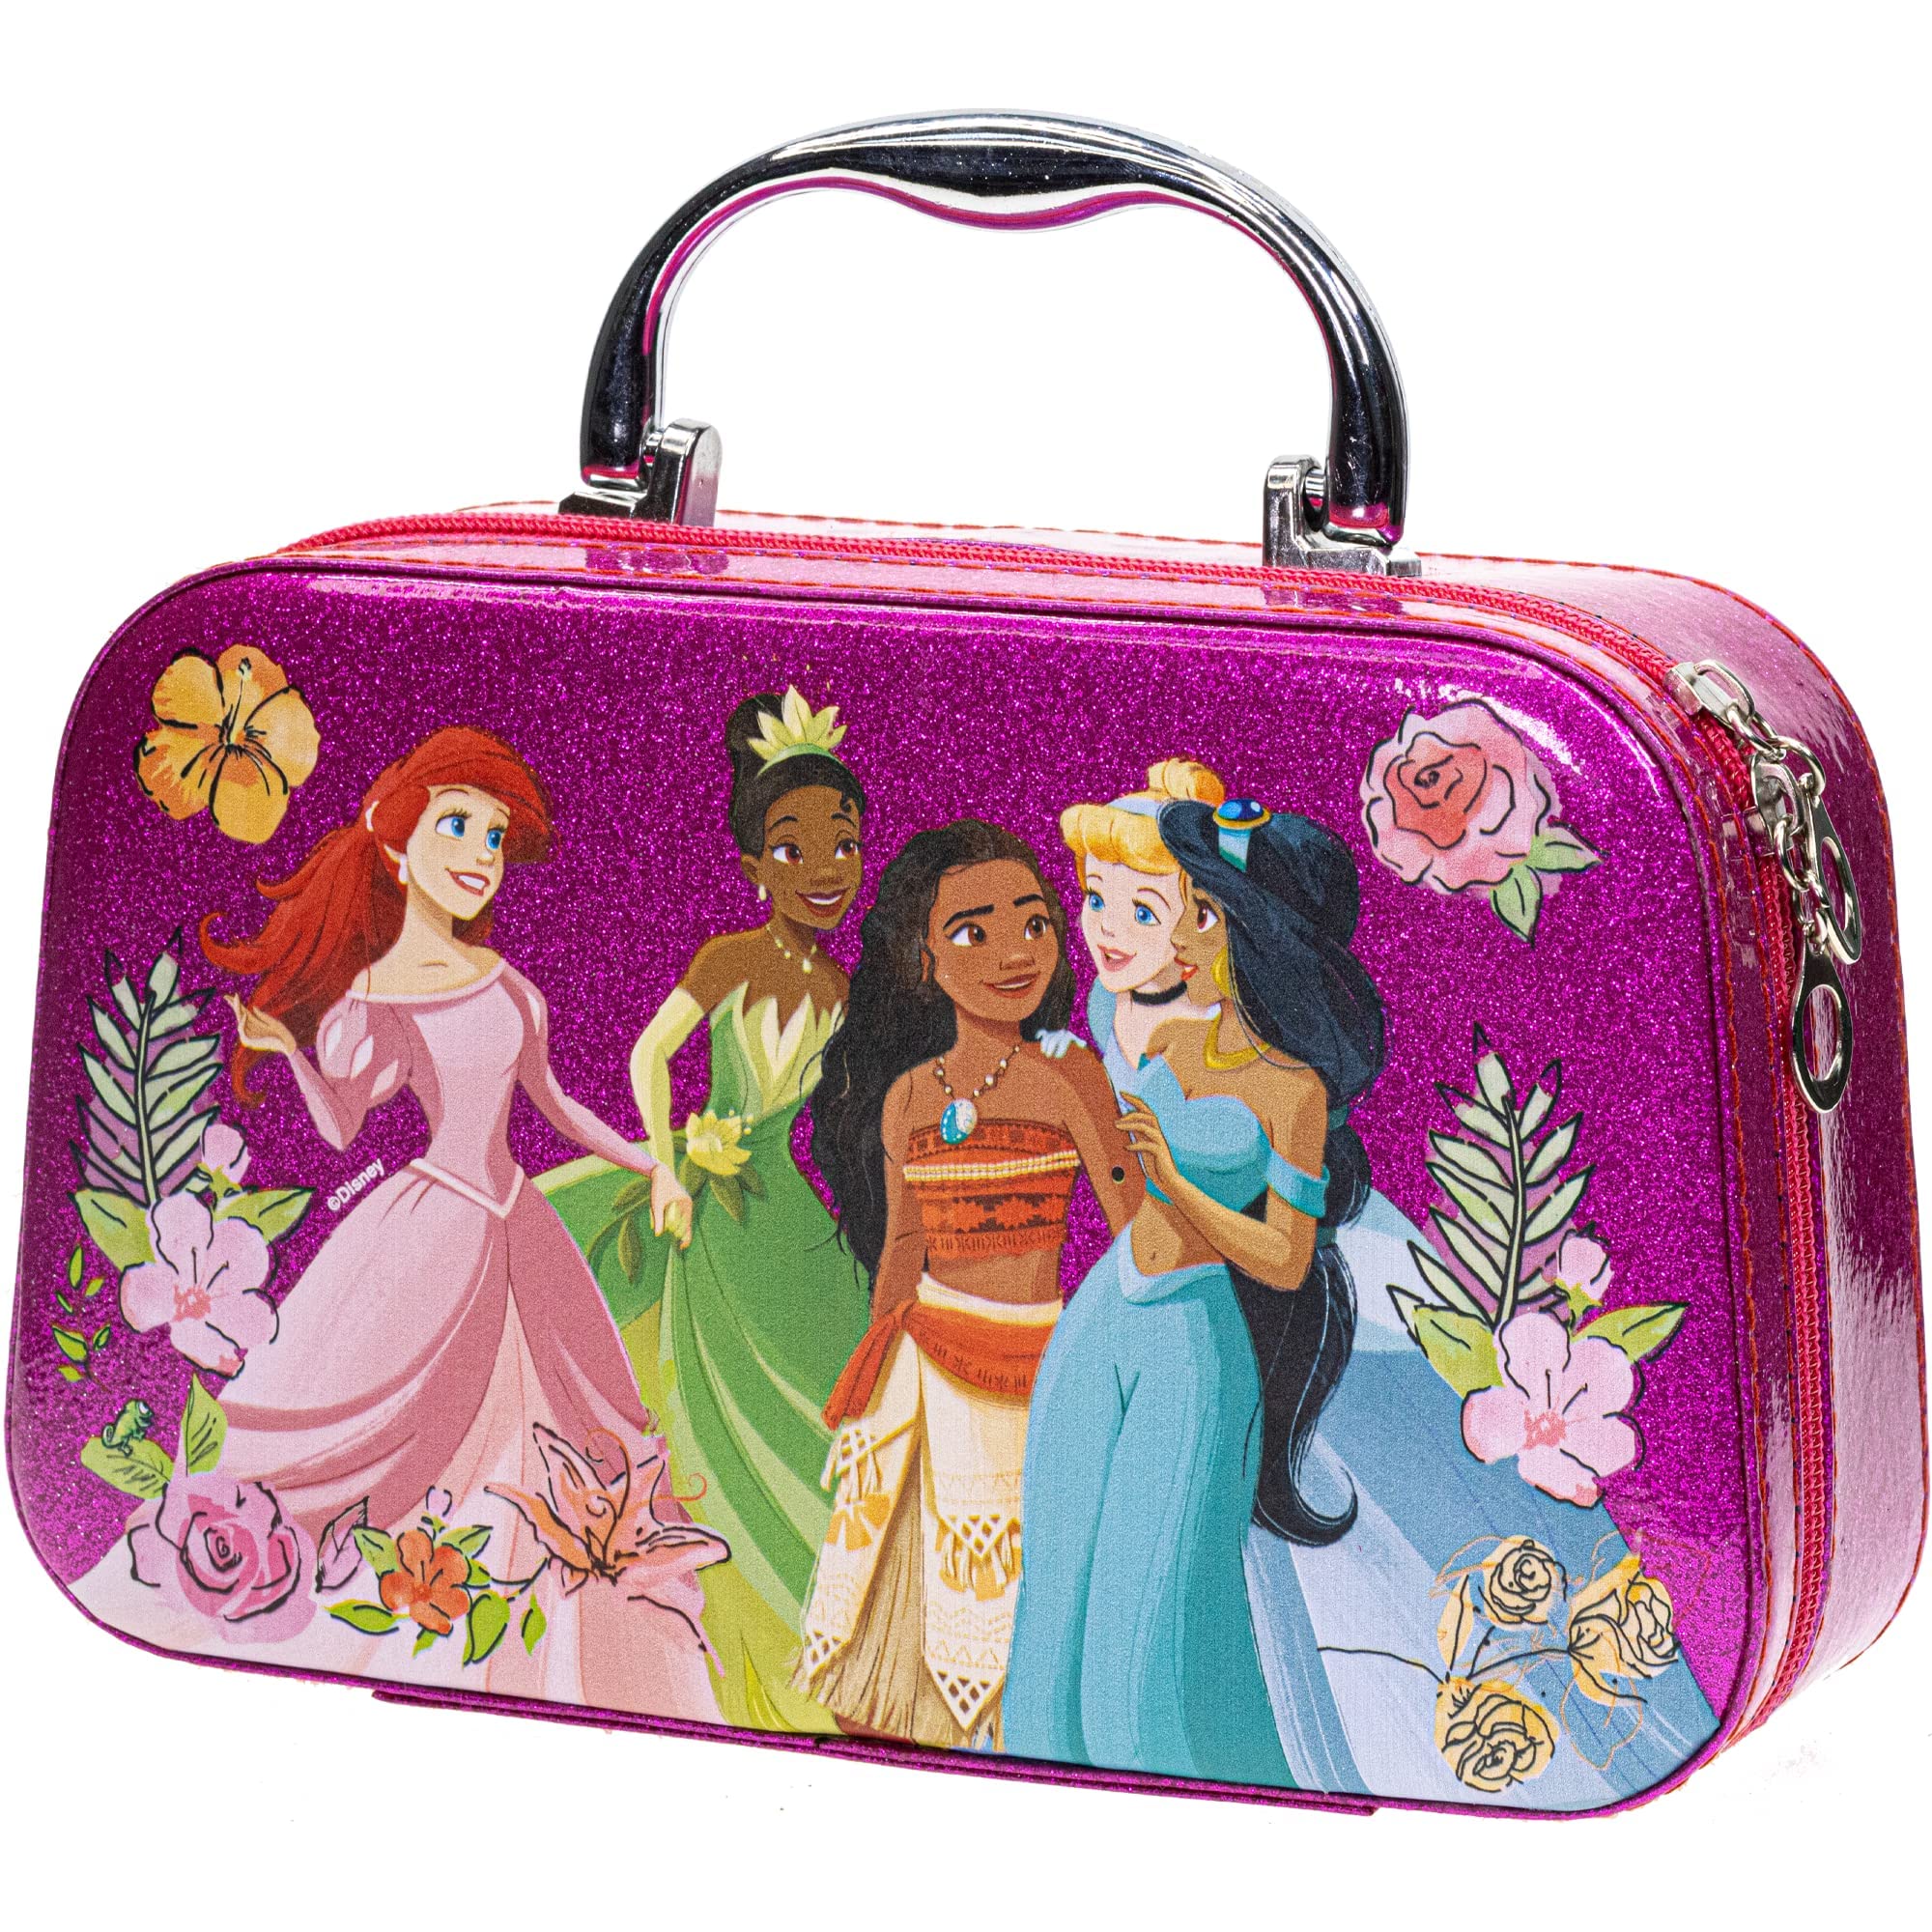 Rirool Princess Themed Play Purse - 31 Piece Toy Set with Handbag, Pretend  Makeup, Smartphone, and More - Perfect for Girls' Role-Playing - Ages 3-8+  - Walmart.com